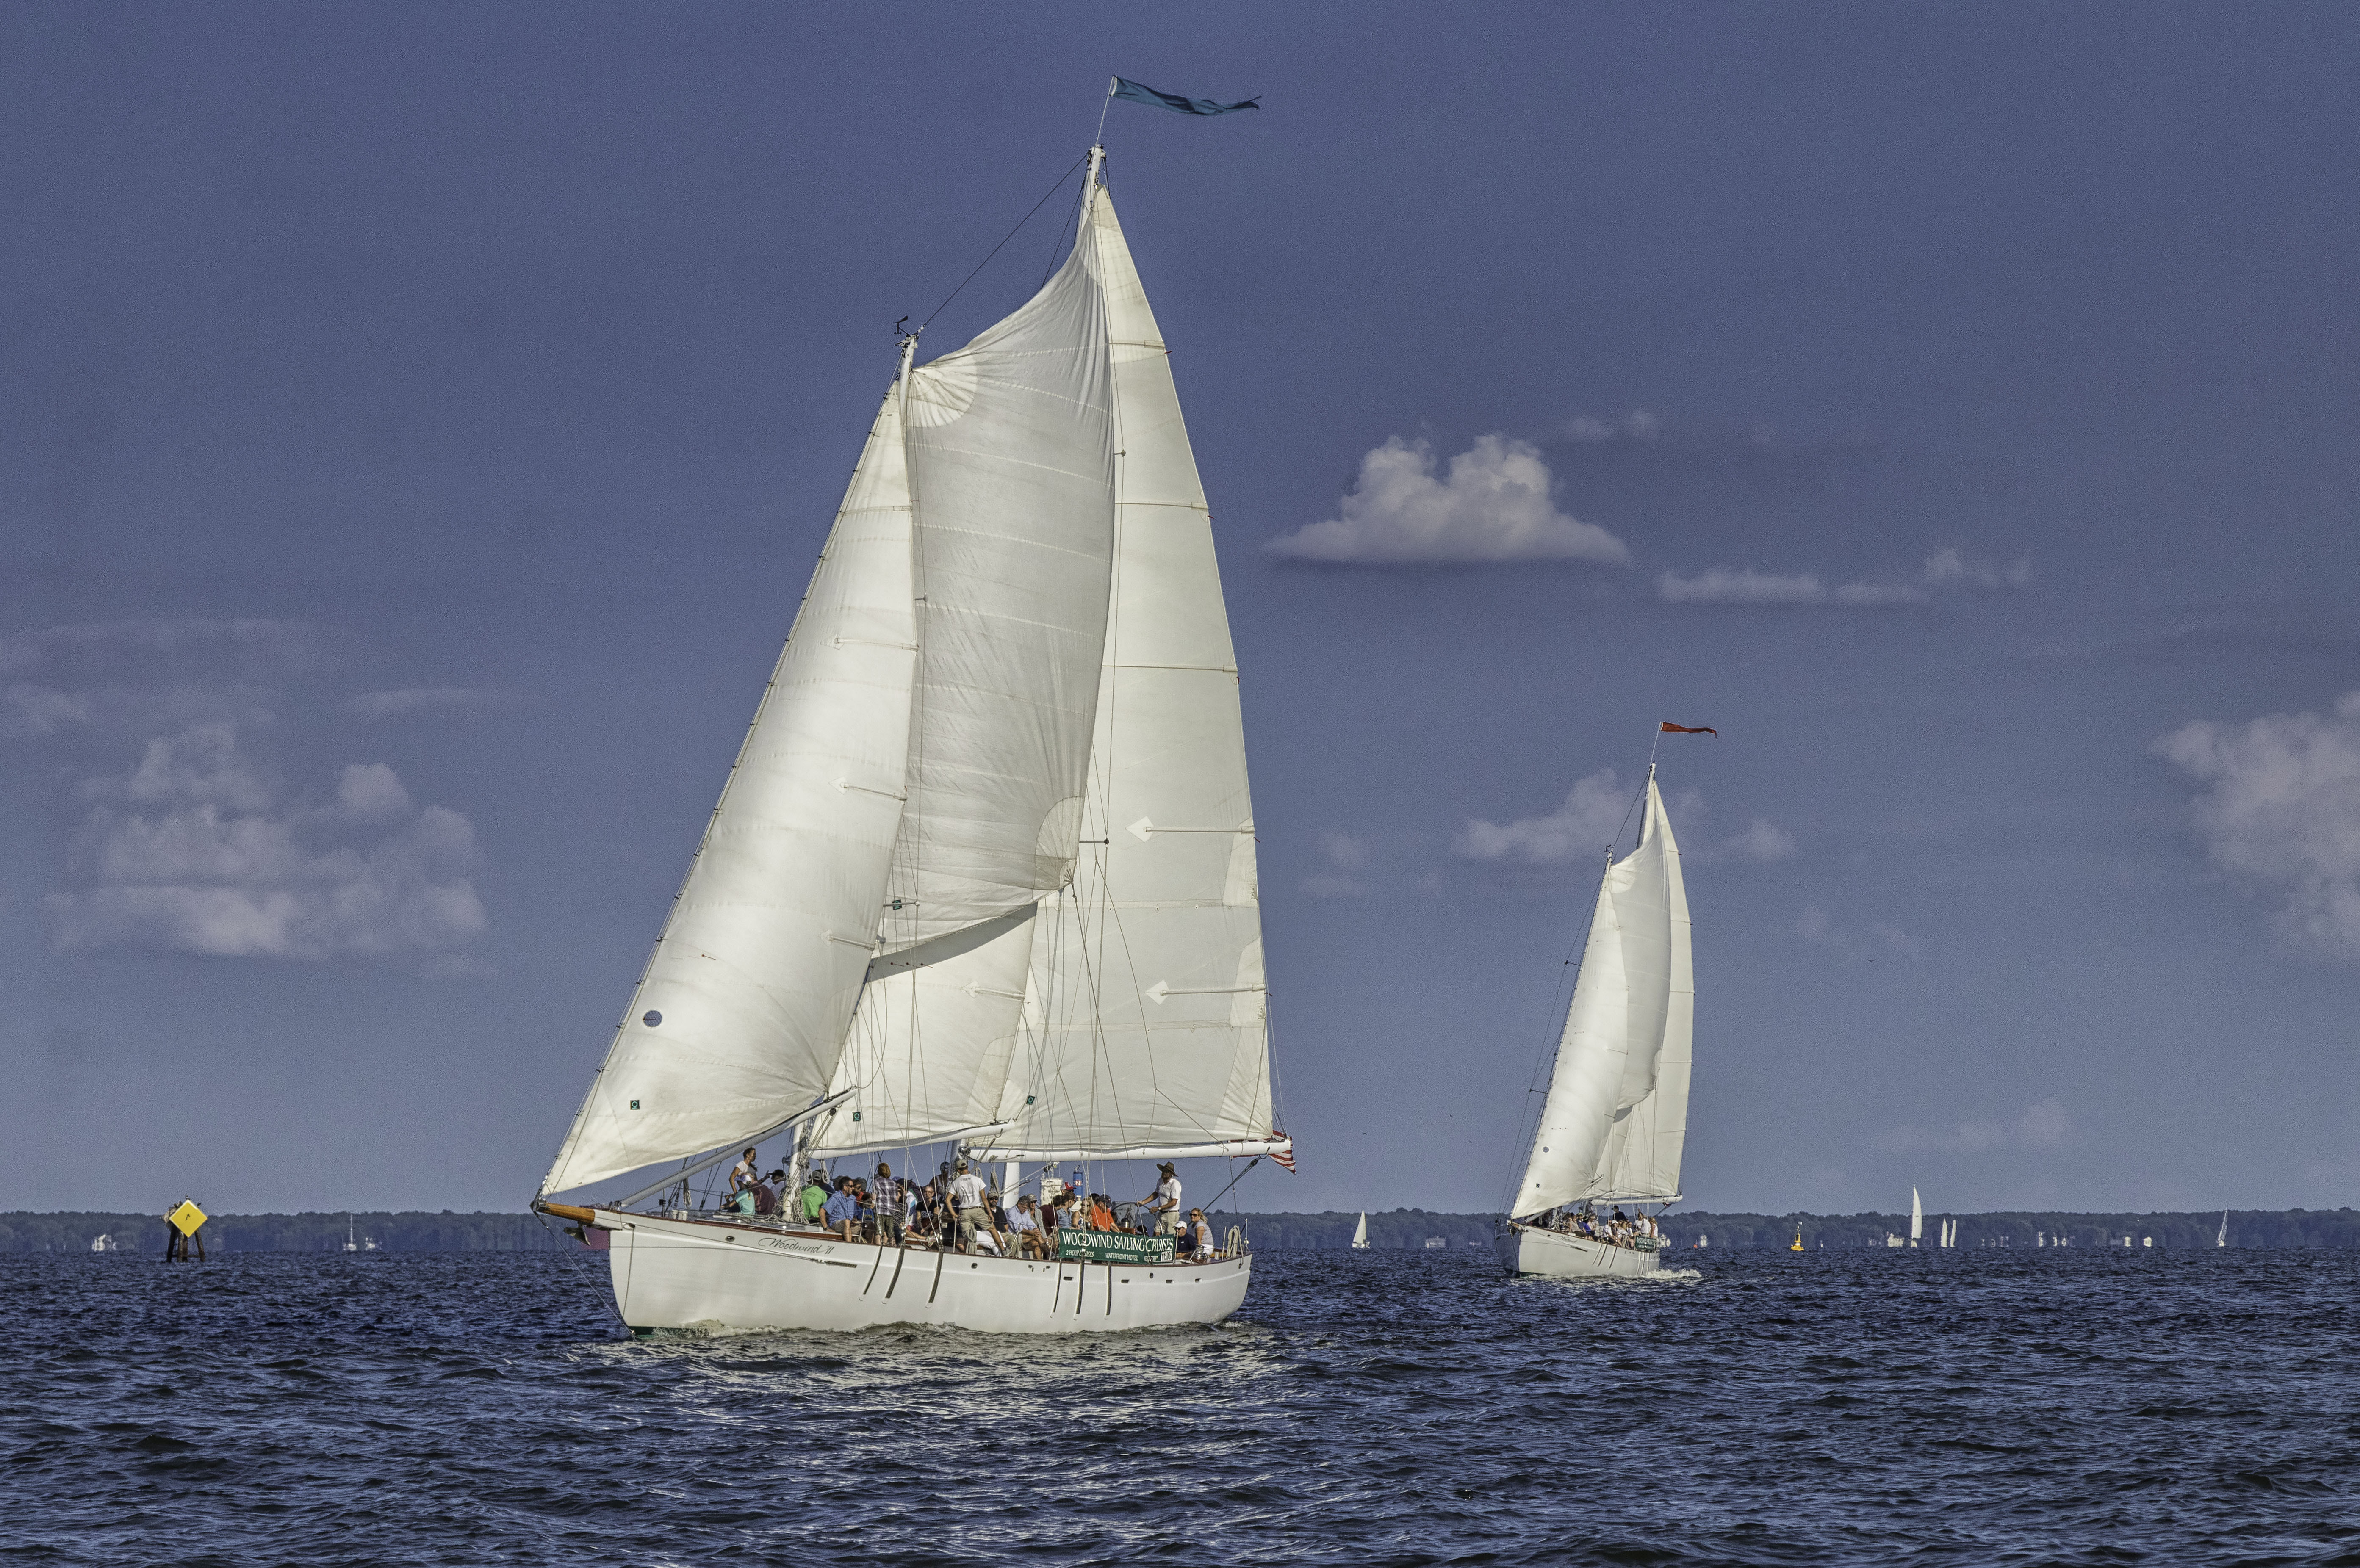 Both schooners following each other on the bay under sail